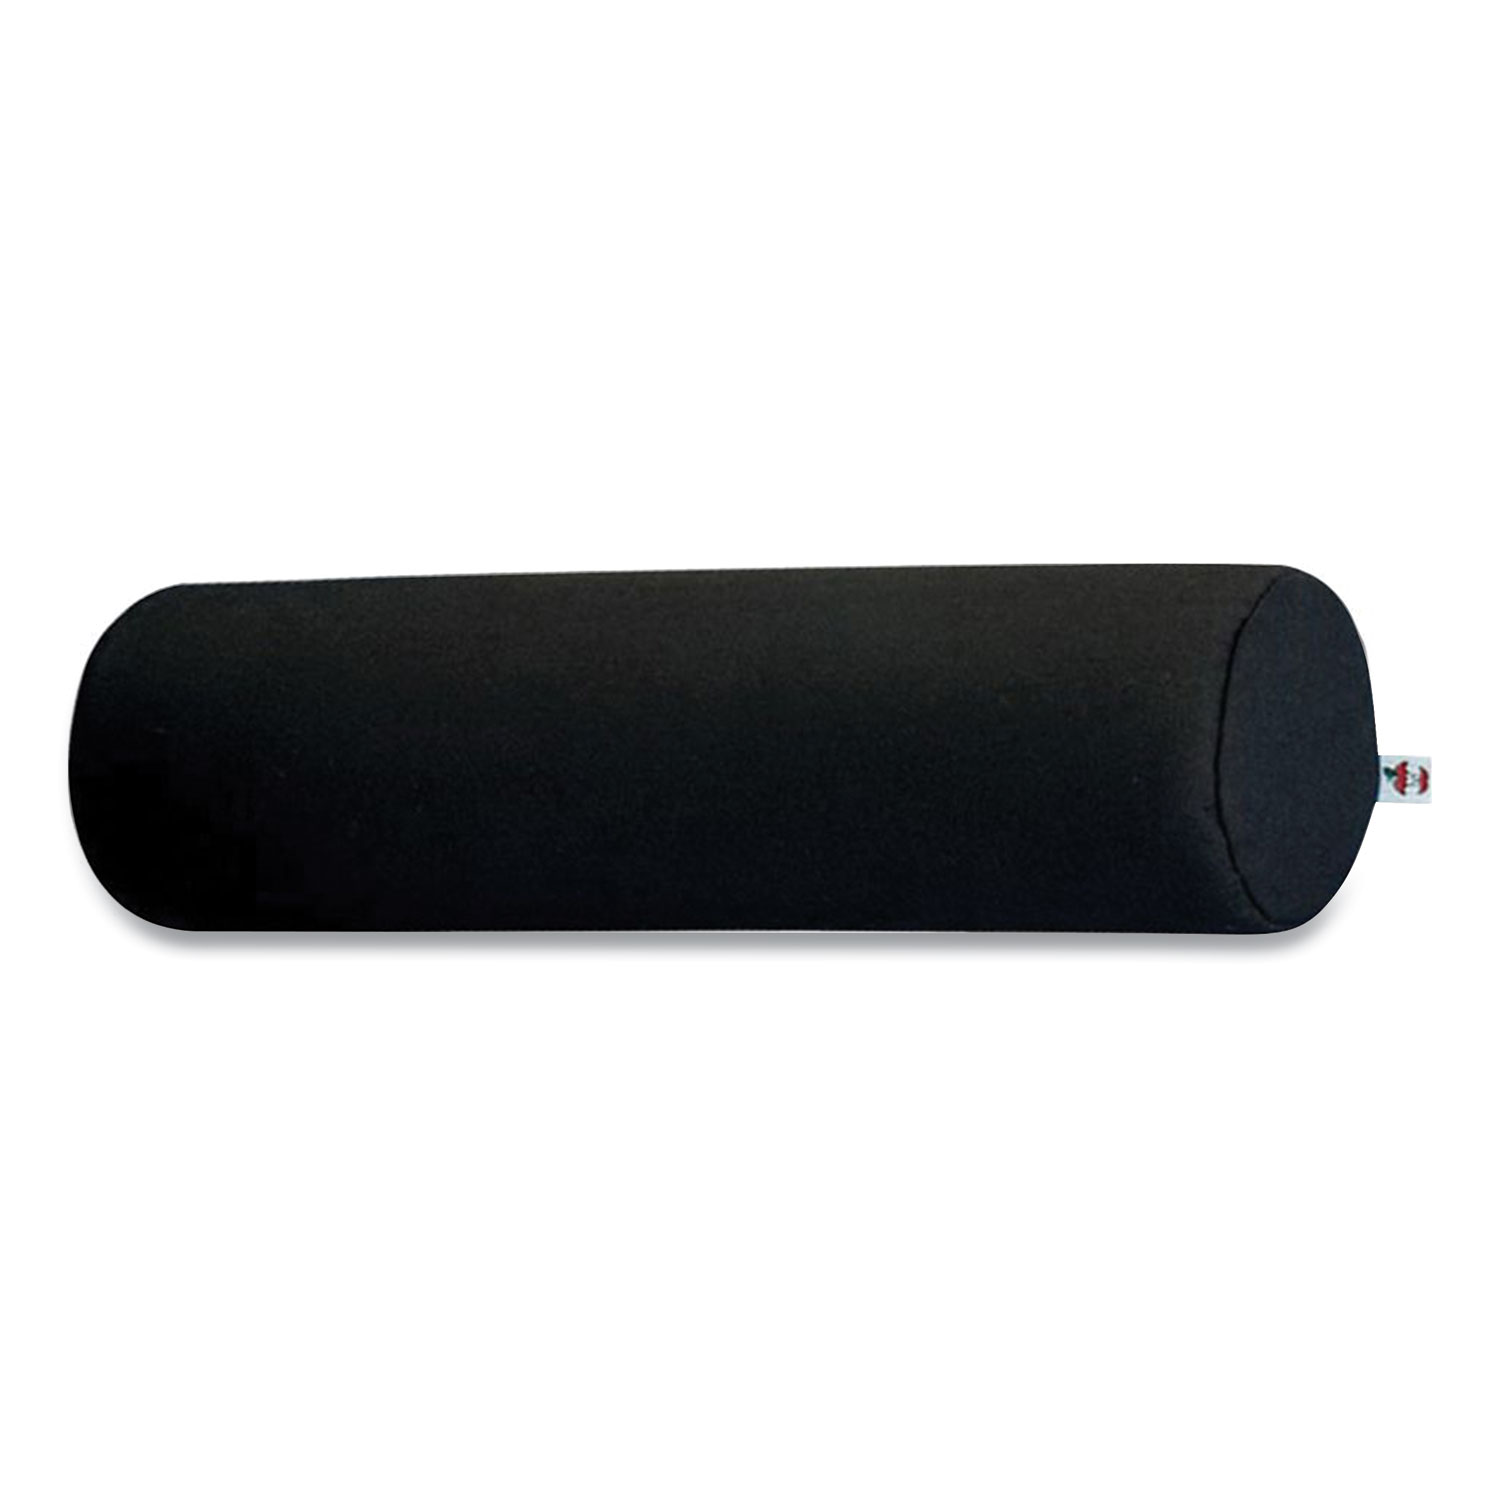 Core Products® Foam Roll Positioning Pillow, 13.5 x 3.75, Black